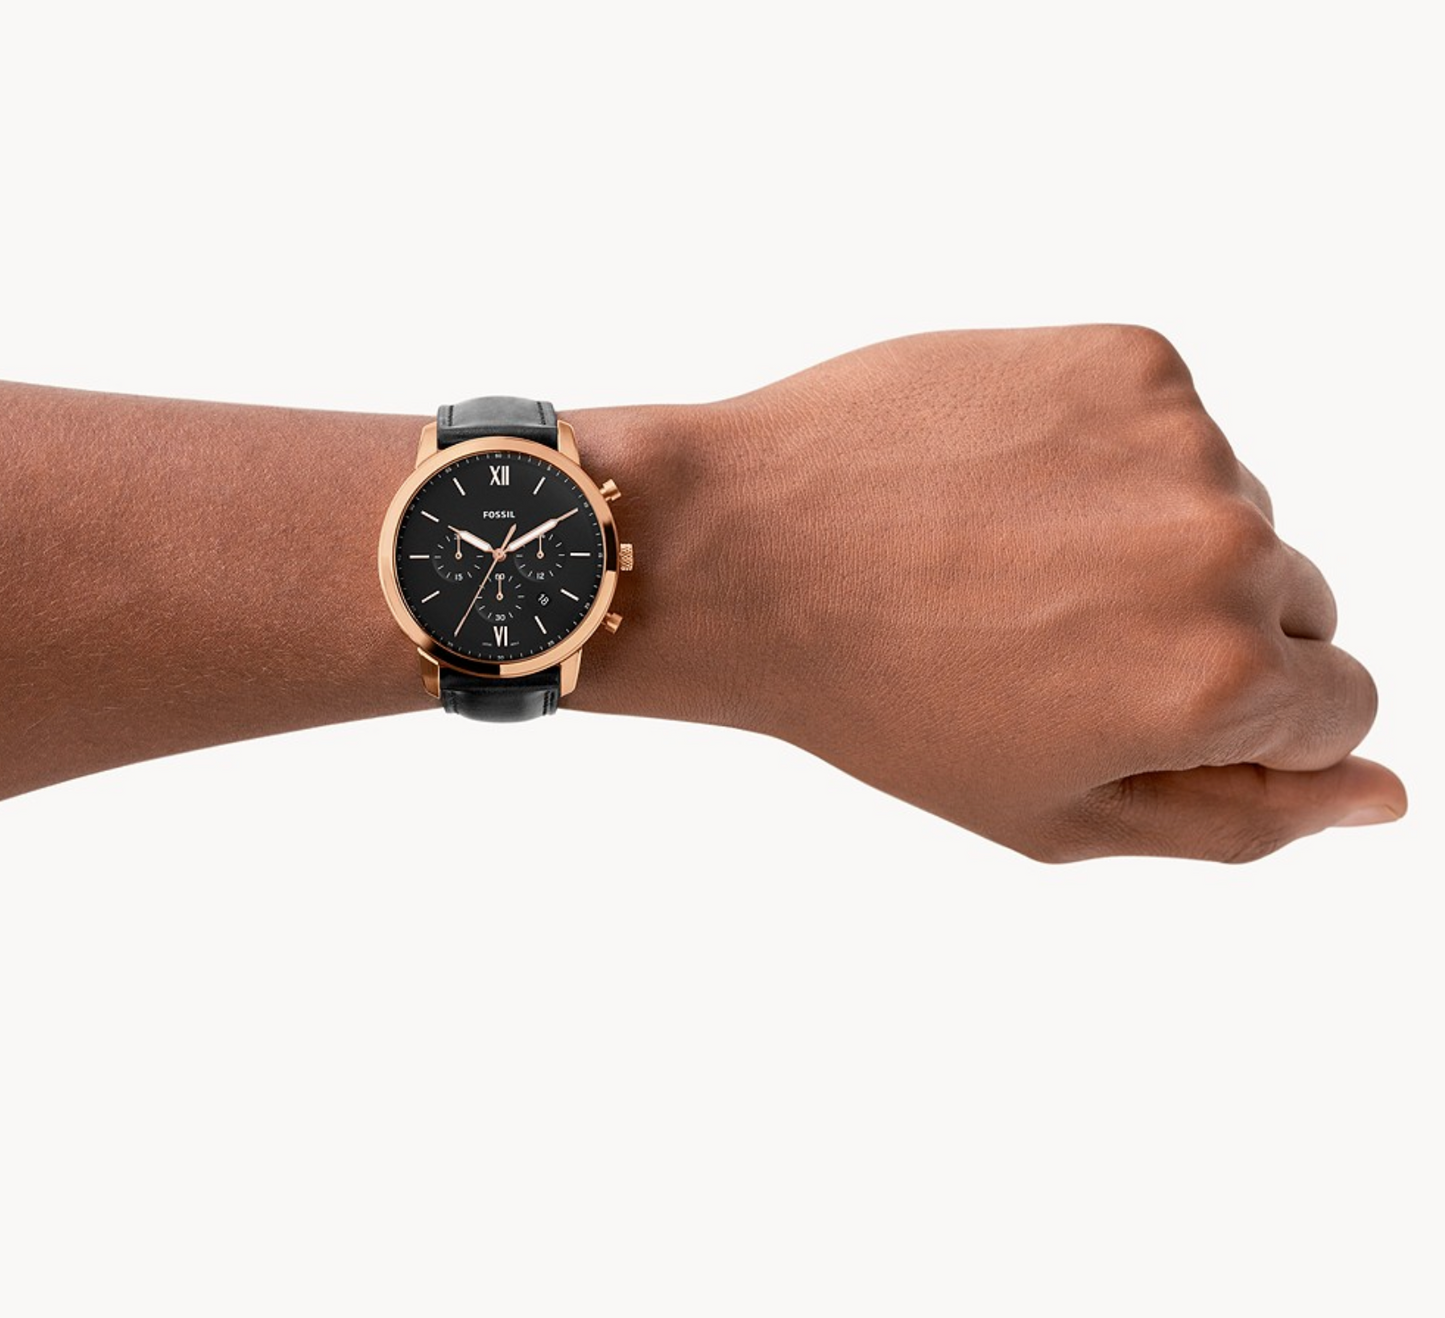 Neutra Chronograph Black Leather Watch | Fossil | Luby 